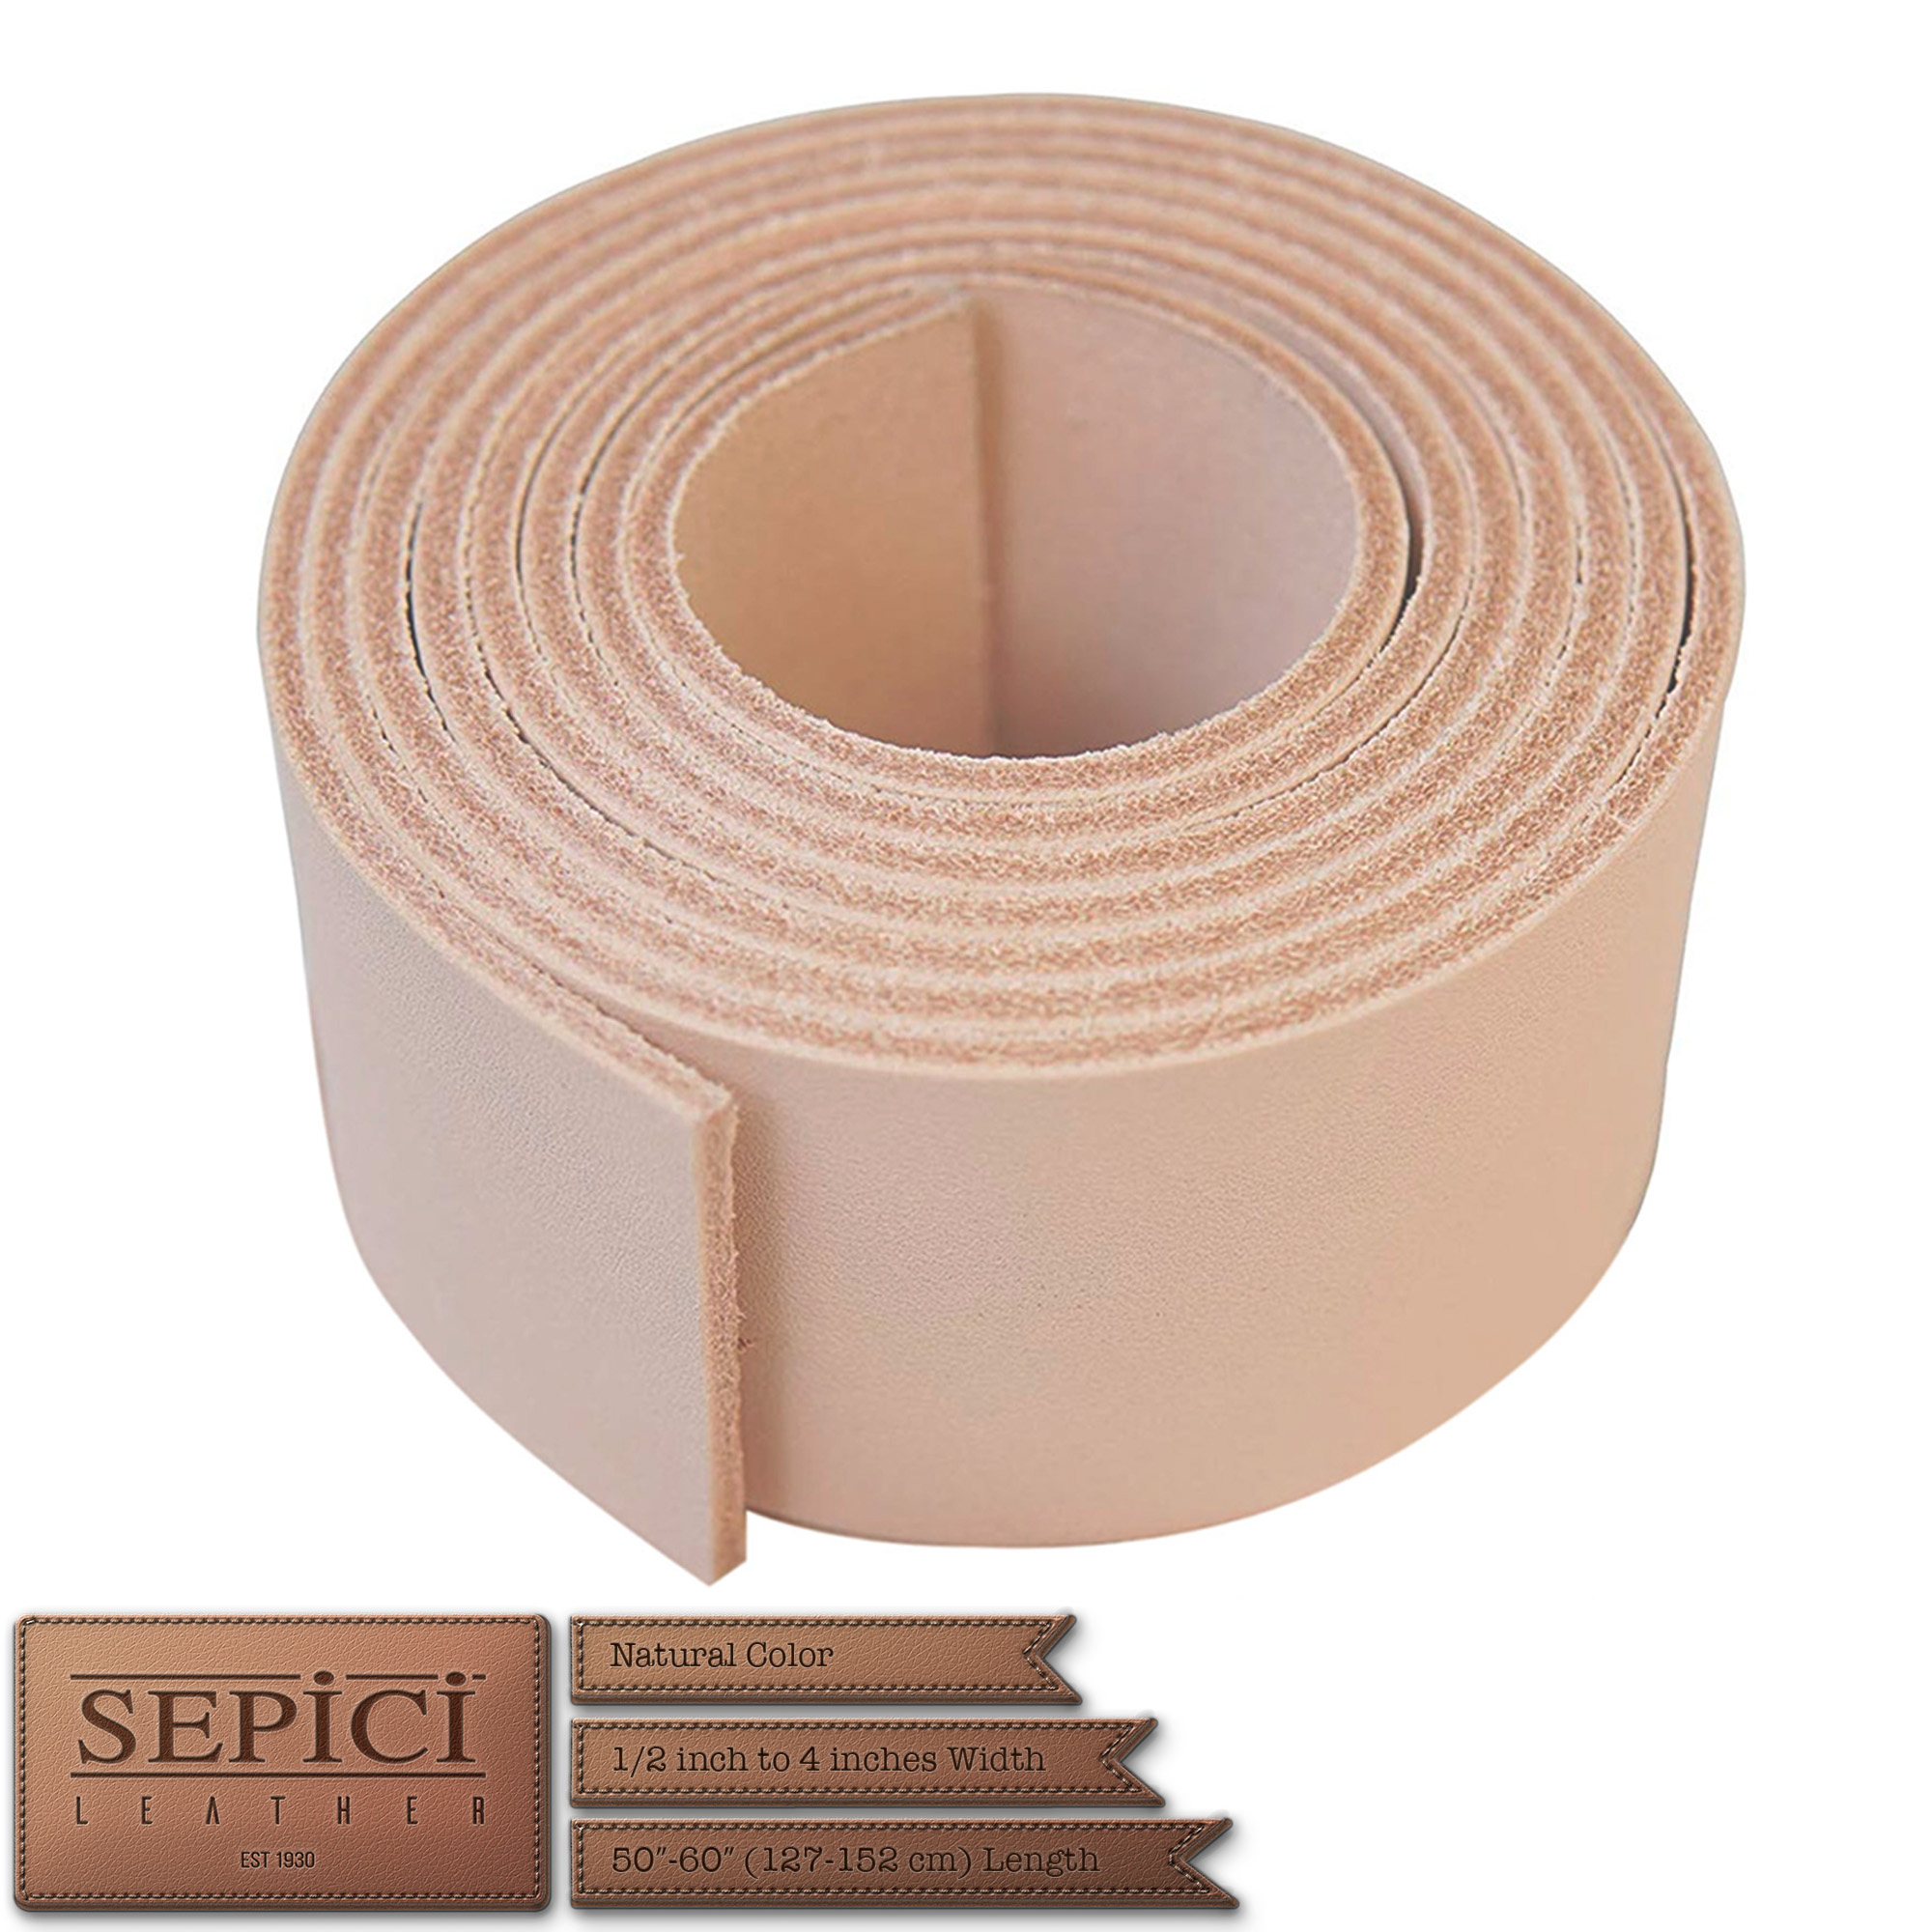 50-60 Inches Long by Sepici Leather 1/2 Inch to 4 Width Tobacco, 2 Black Tobacco or Brown Leather Straps 9/10 oz Thickness 